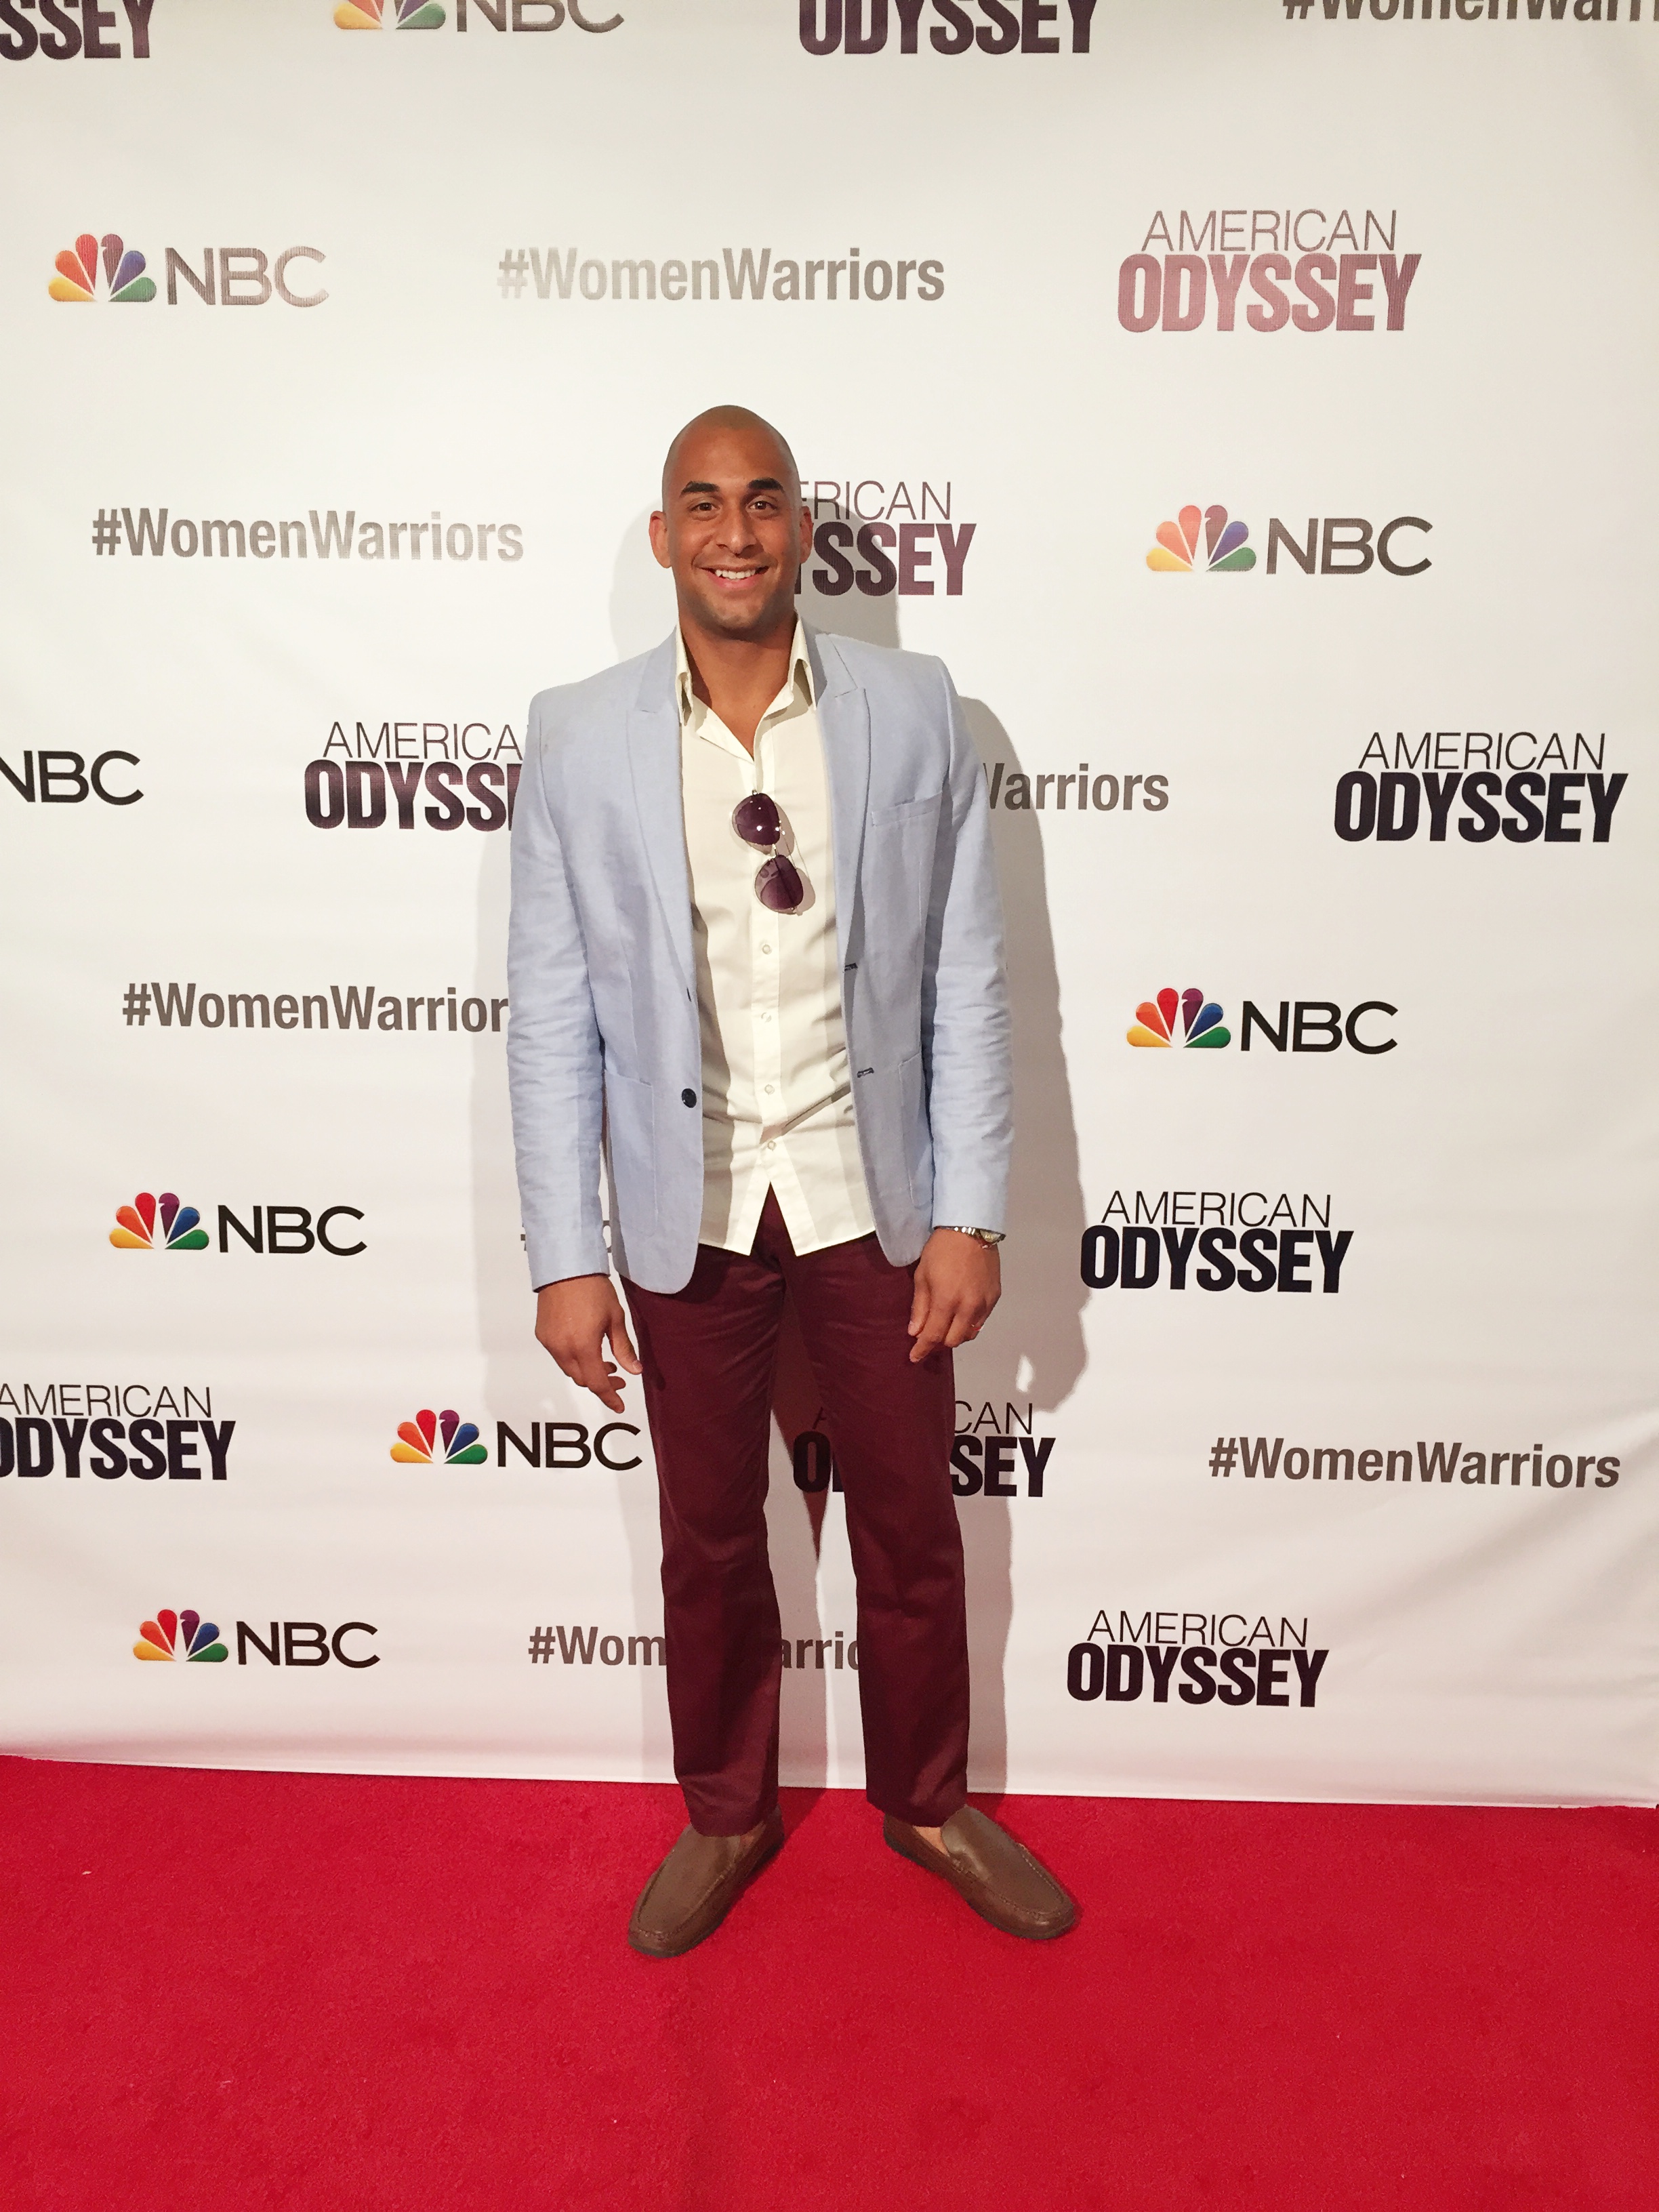 Actor Jon Daza attends the premiere of the TV series American Odyssey.